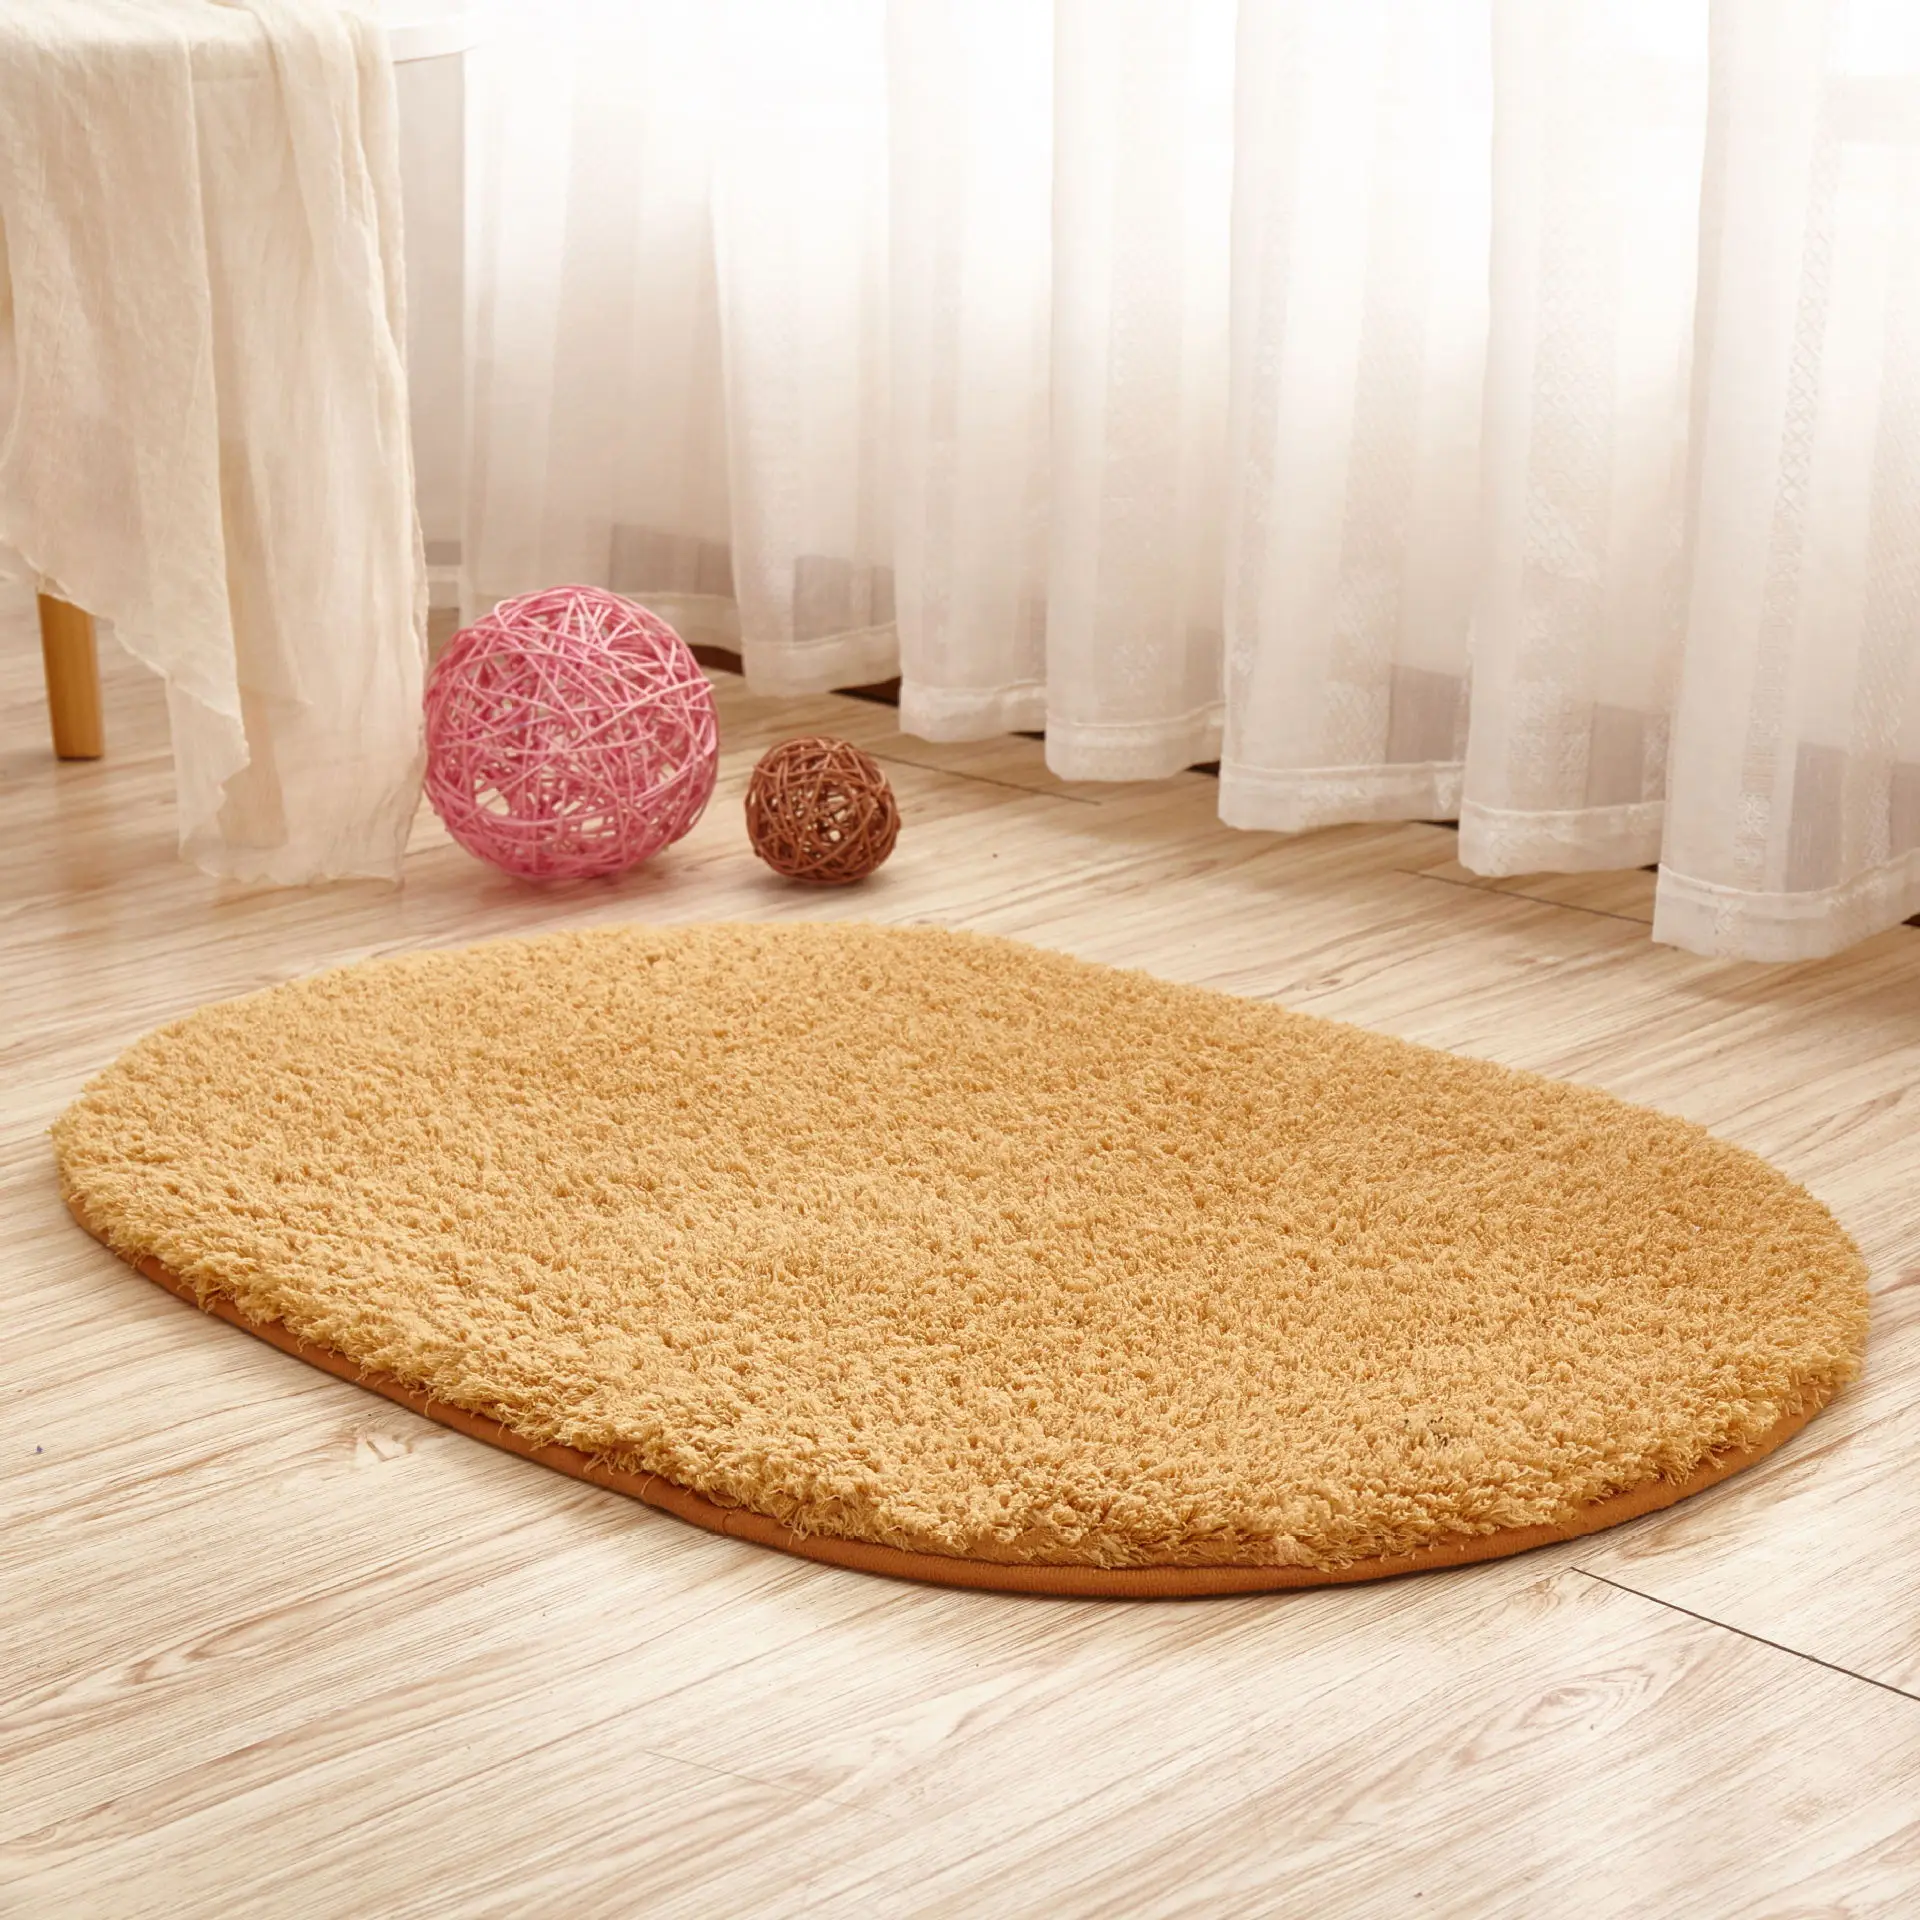 

CEL ER jin li Stylish and Durable Oval Carpet, Machine-Washable, Perfect for Any Room in Your Home